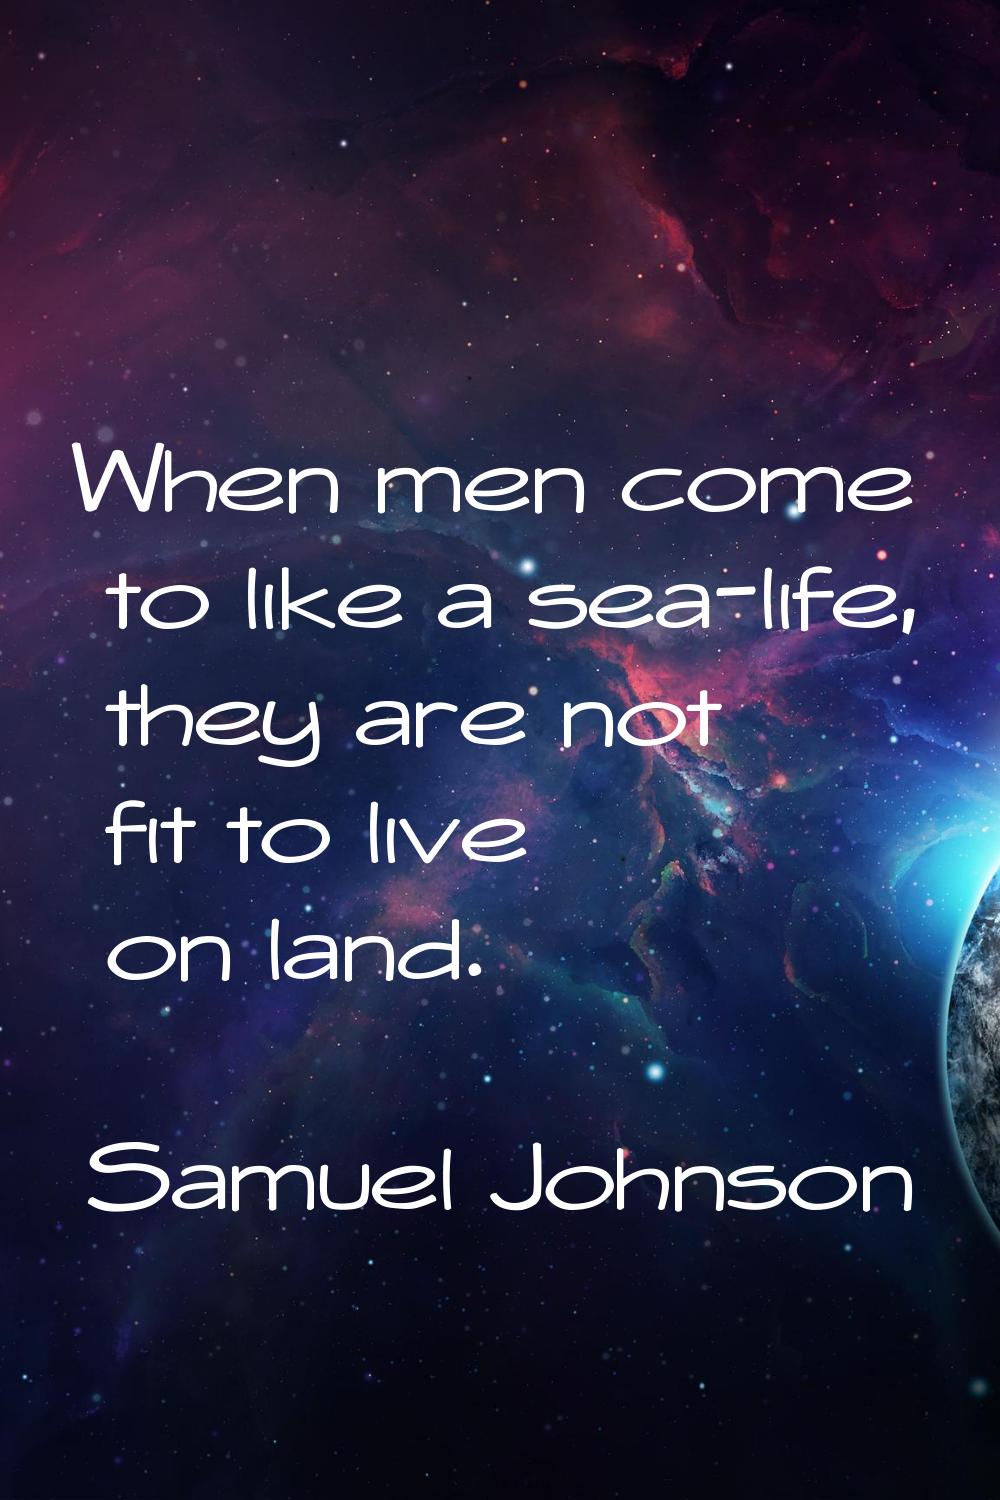 When men come to like a sea-life, they are not fit to live on land.